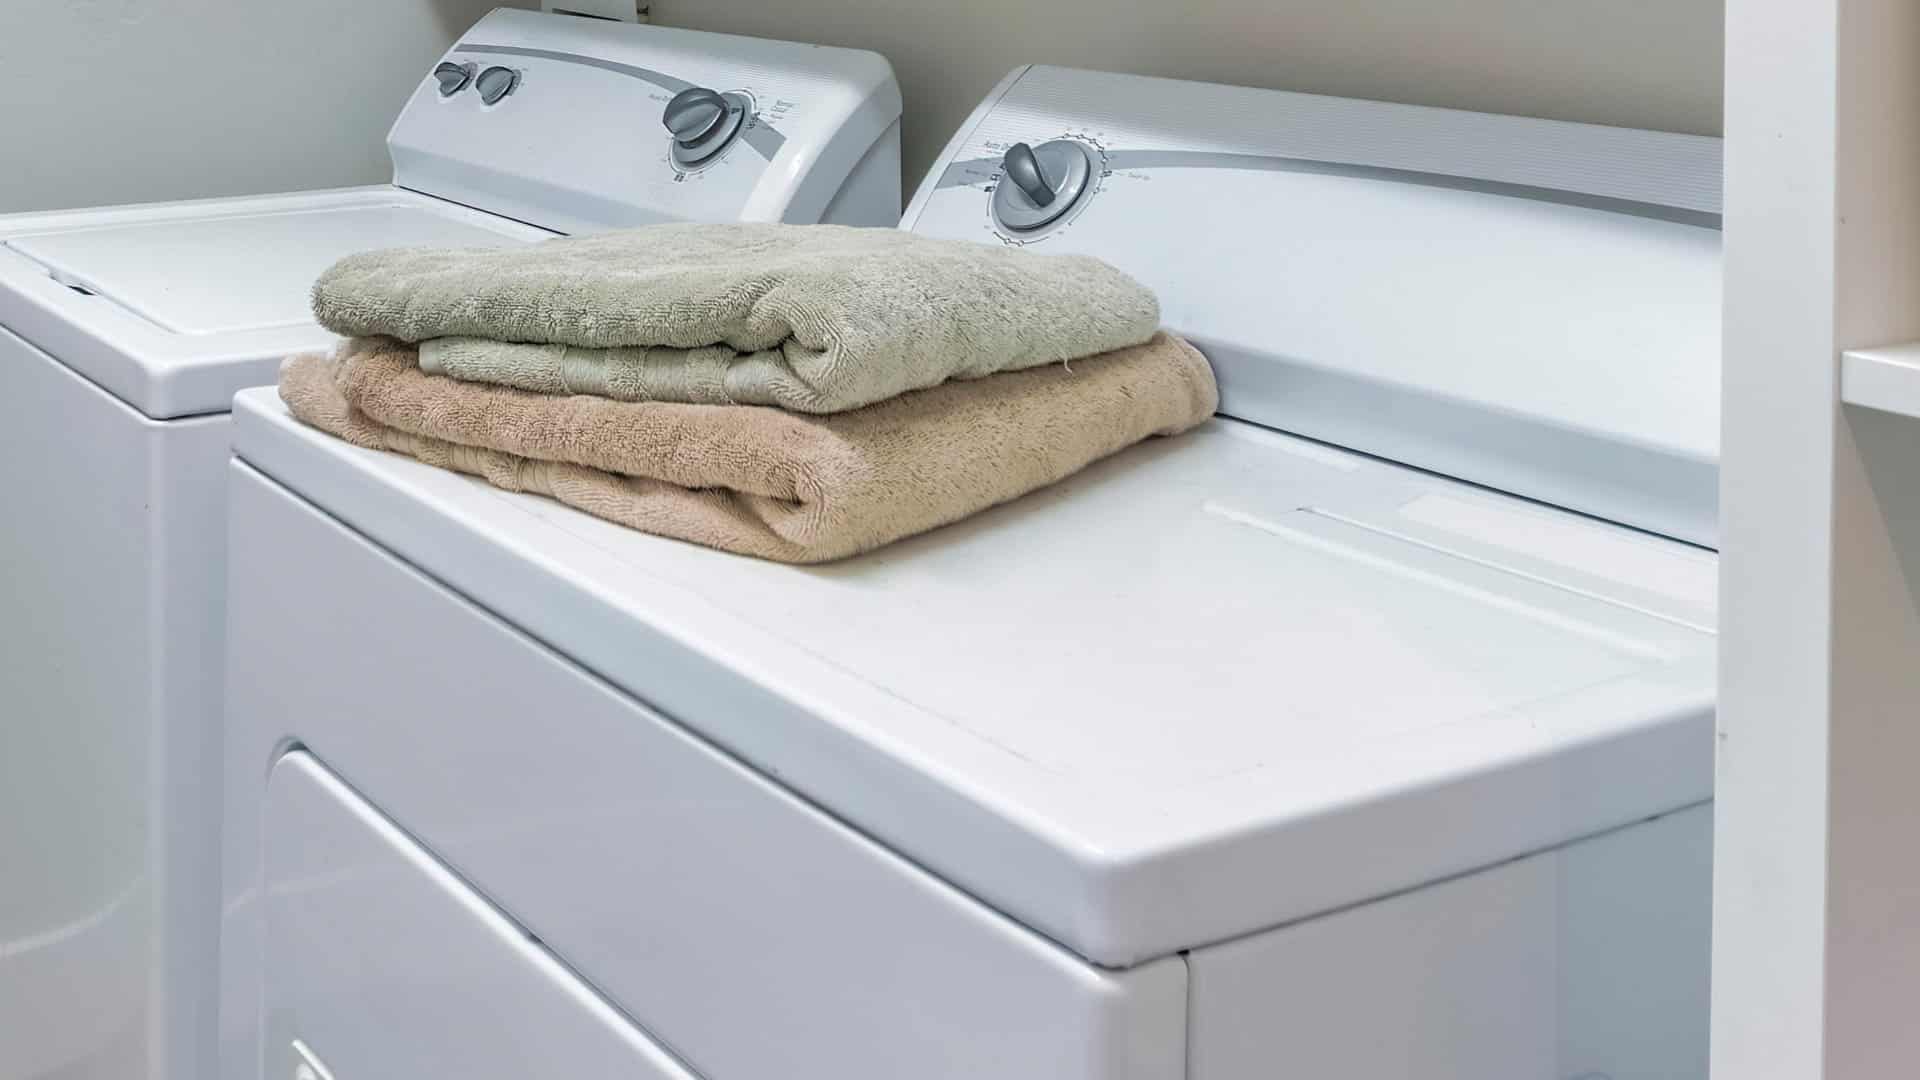 Featured image for “Amana Dryer Not Heating? Try These 5 Fixes”